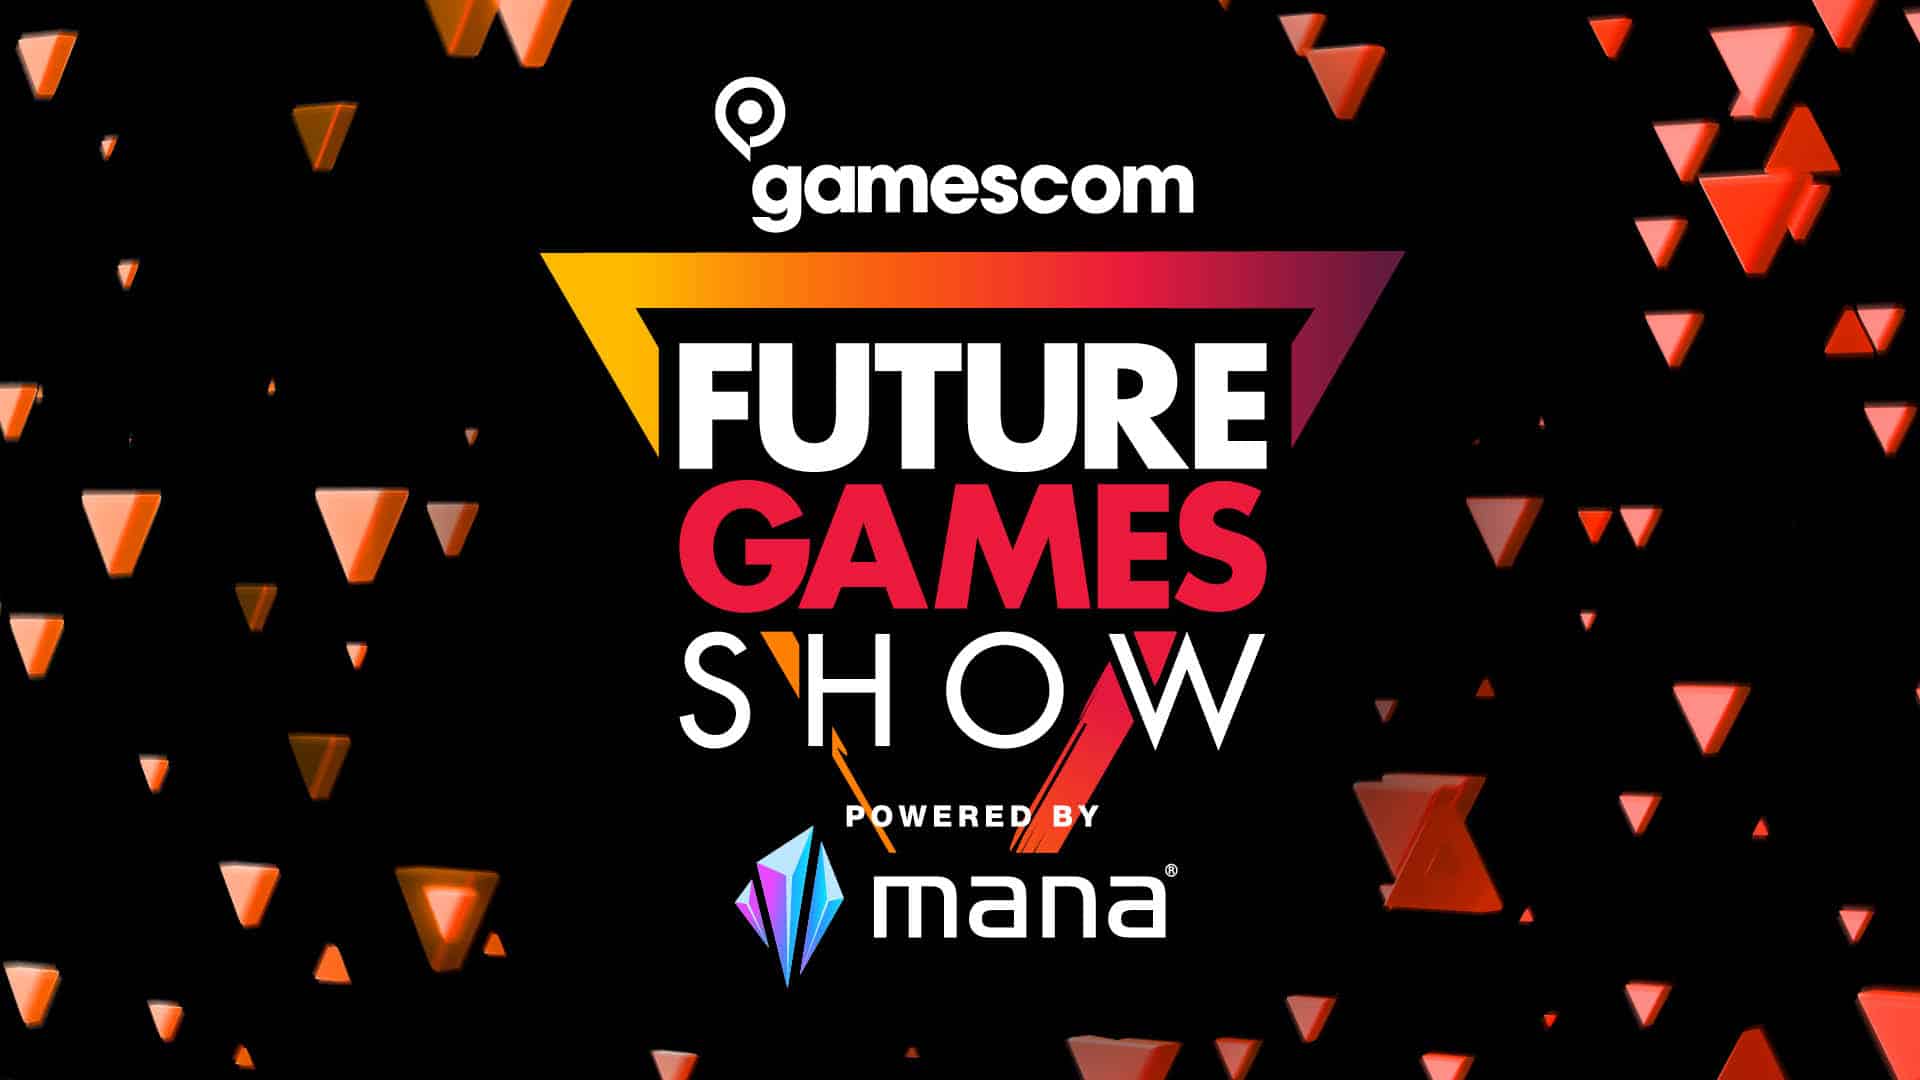 The Last of Us and Apex Legends stars to host Future Games Show at Gamescom